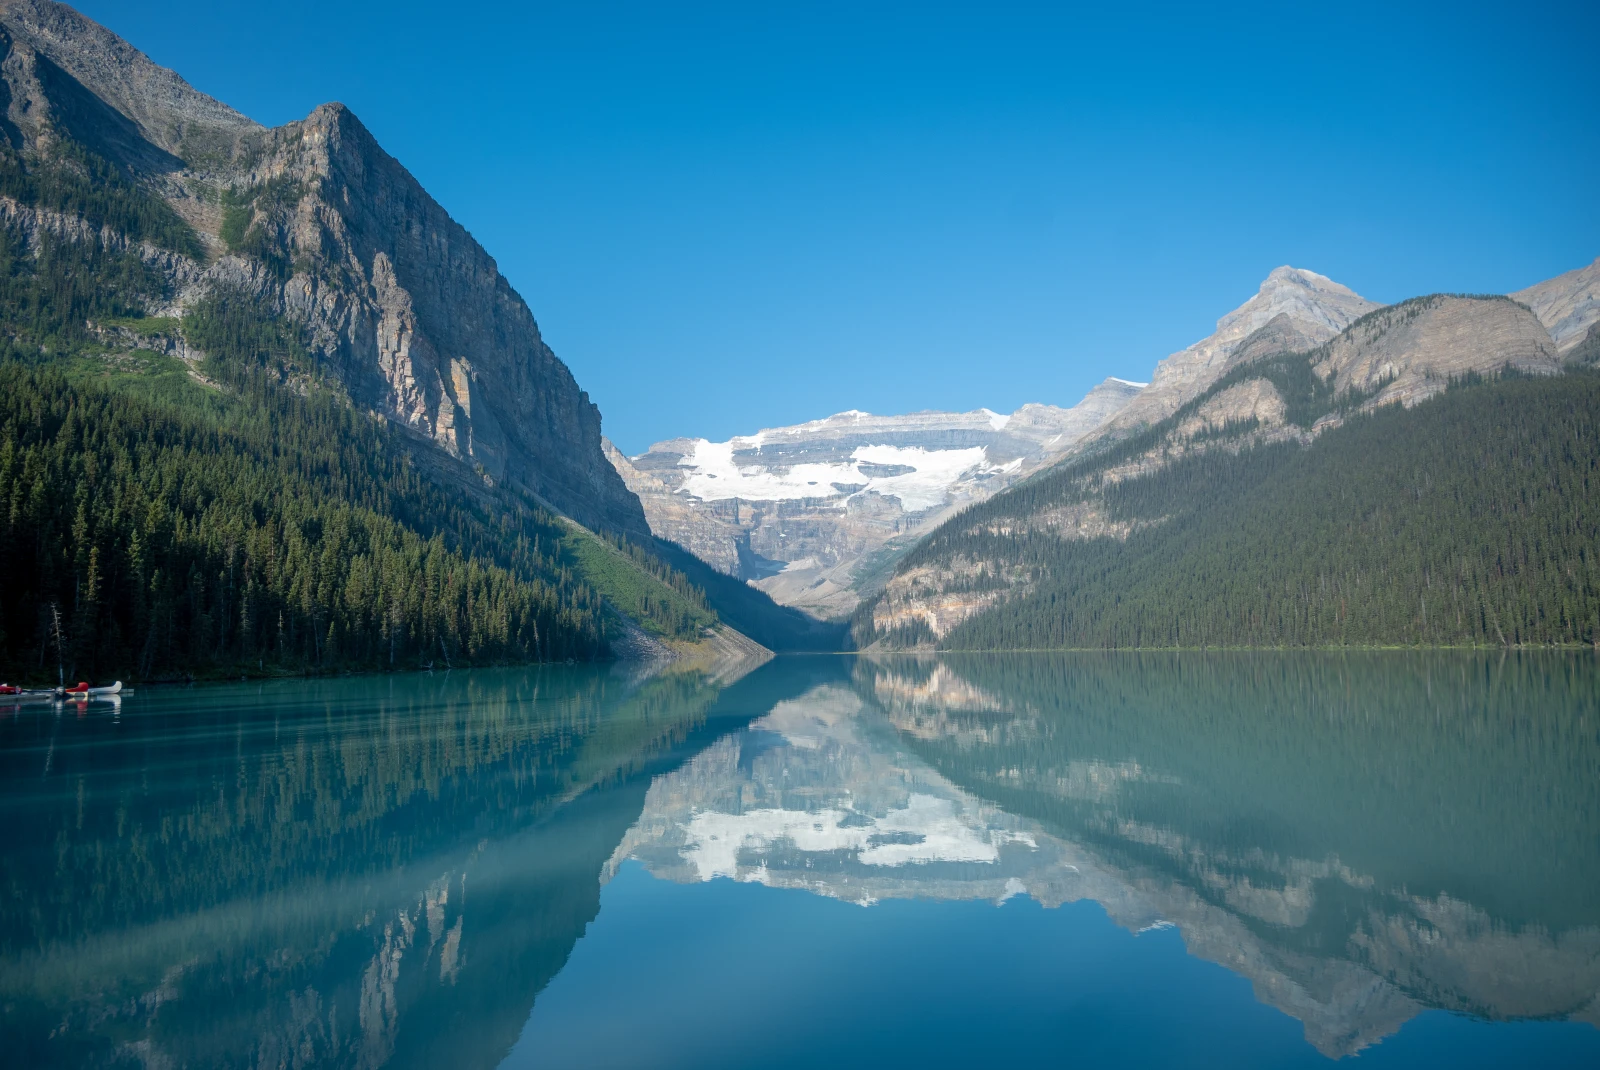 Lake Louise is a turquoise gem nestled in the heart of the Canadian Rockies, offering unparalleled alpine beauty and serenity.